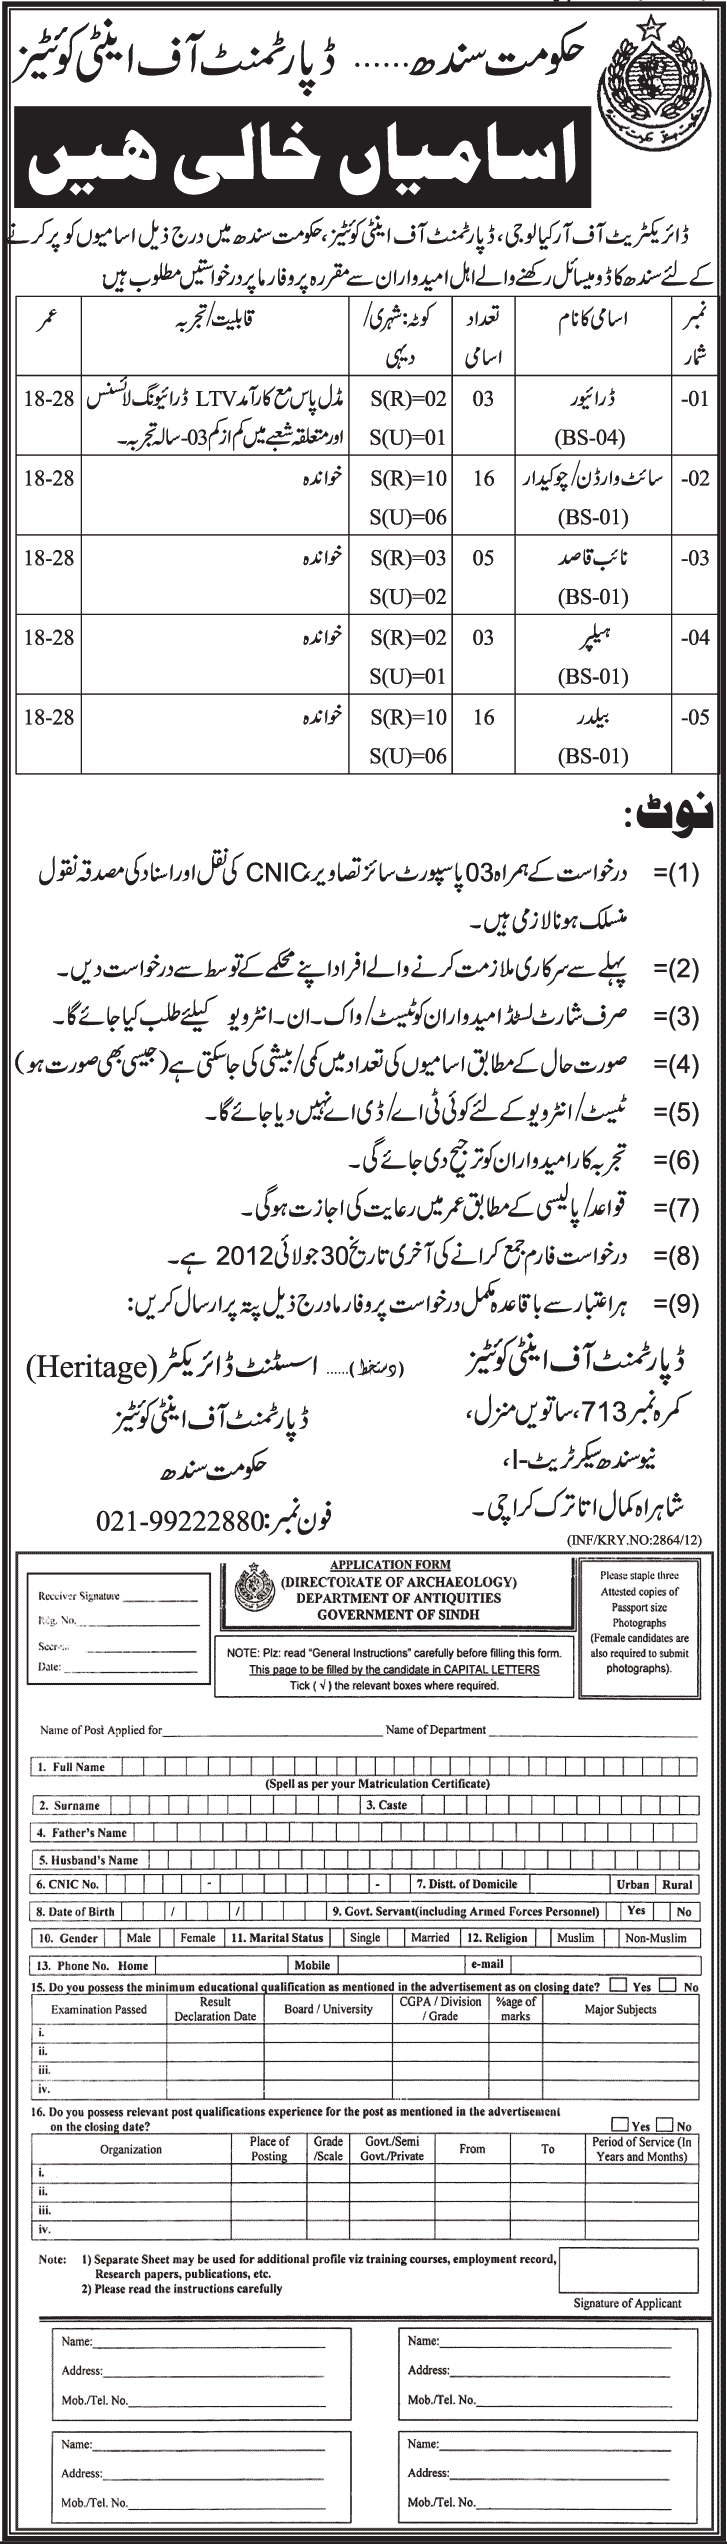 Department of Antiquities Requires Low Staff (Government of Sindh)